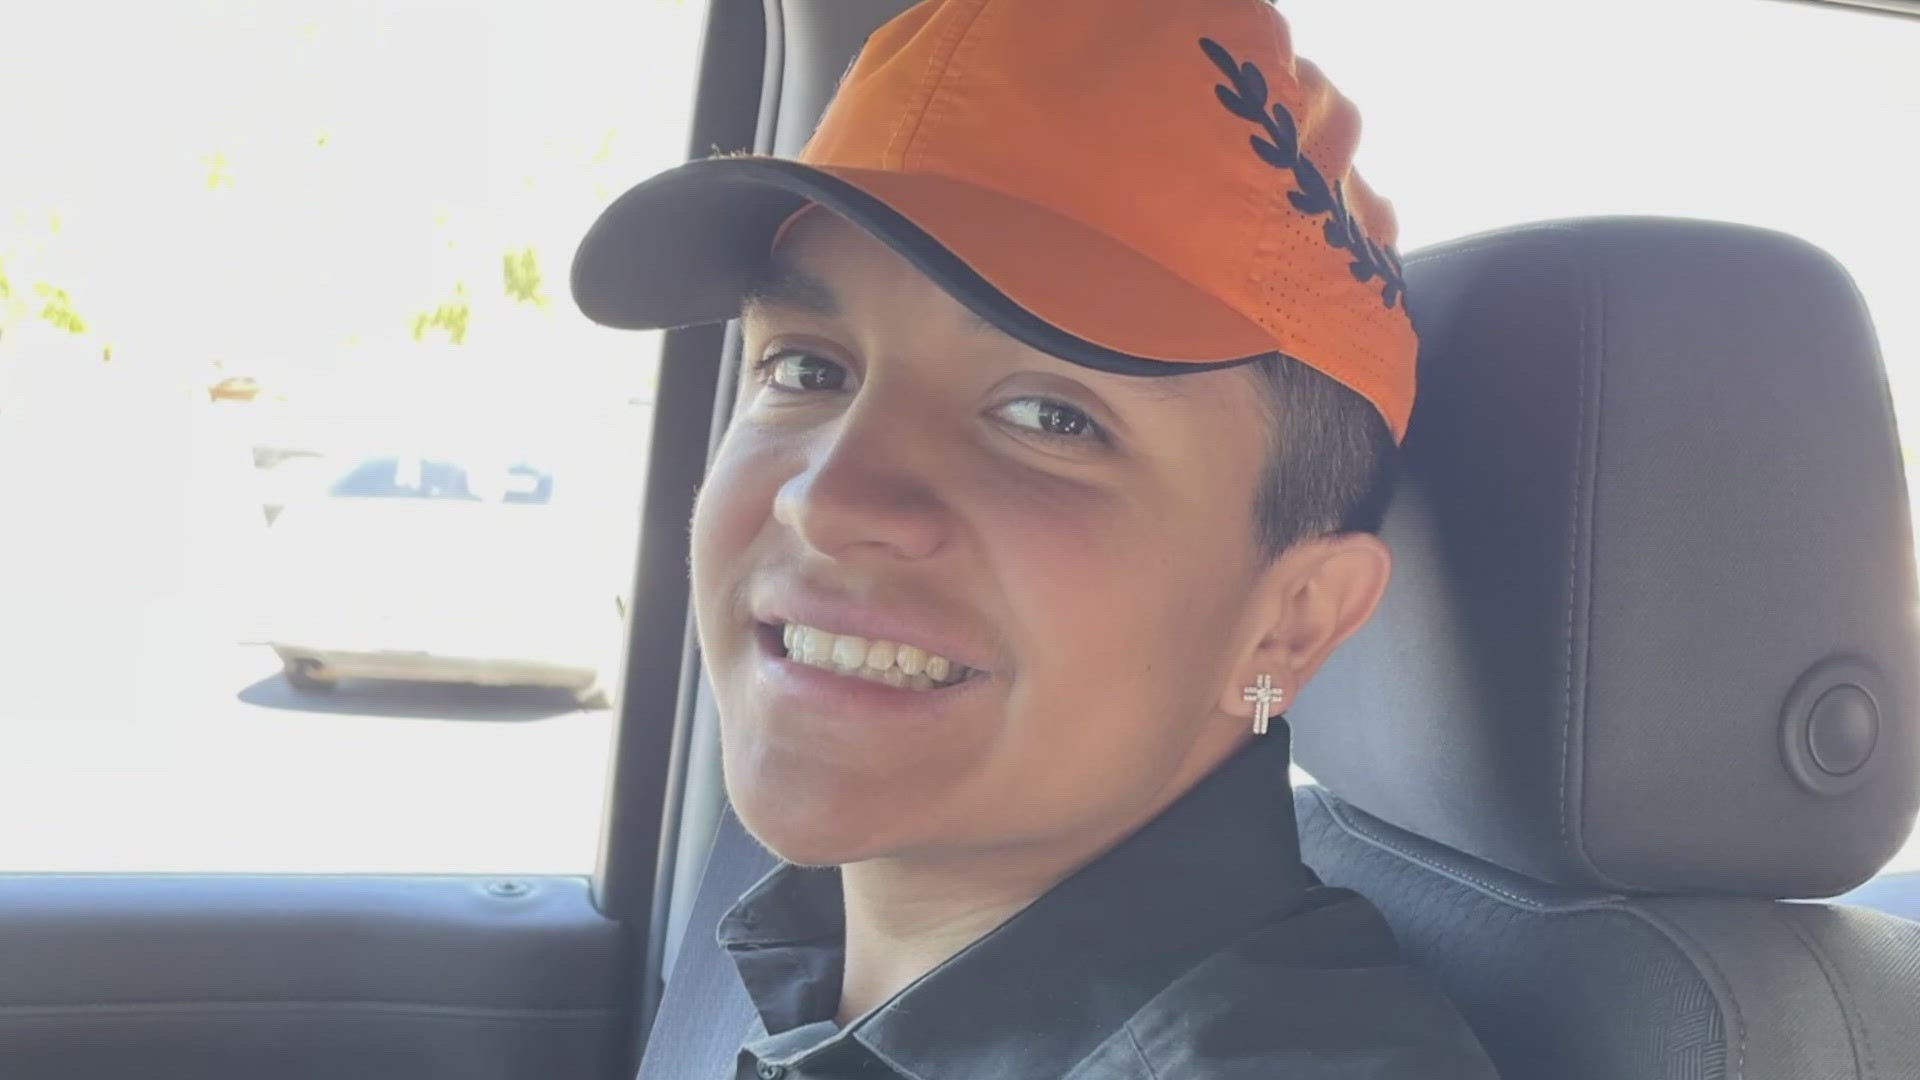 18-year-old Stephen Jacobo was killed at a house party in November 2022. More than a year later, an arrest has been made and 12News spoke with Jacobo's mother